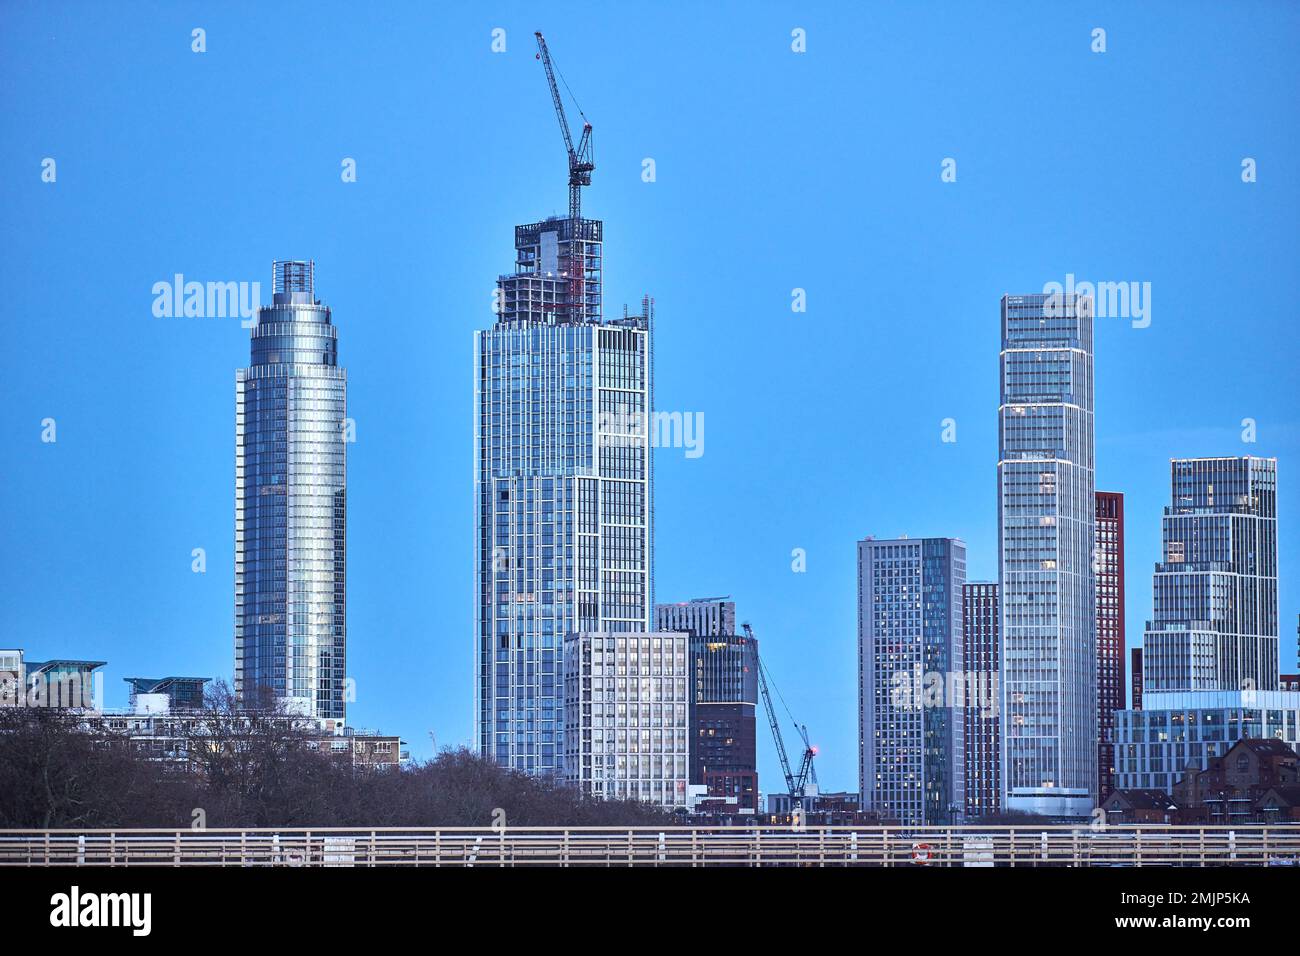 Skyline of riverside skyscrapers beside the bridge at Vauxhall over the river Thames, London, England. Stock Photo